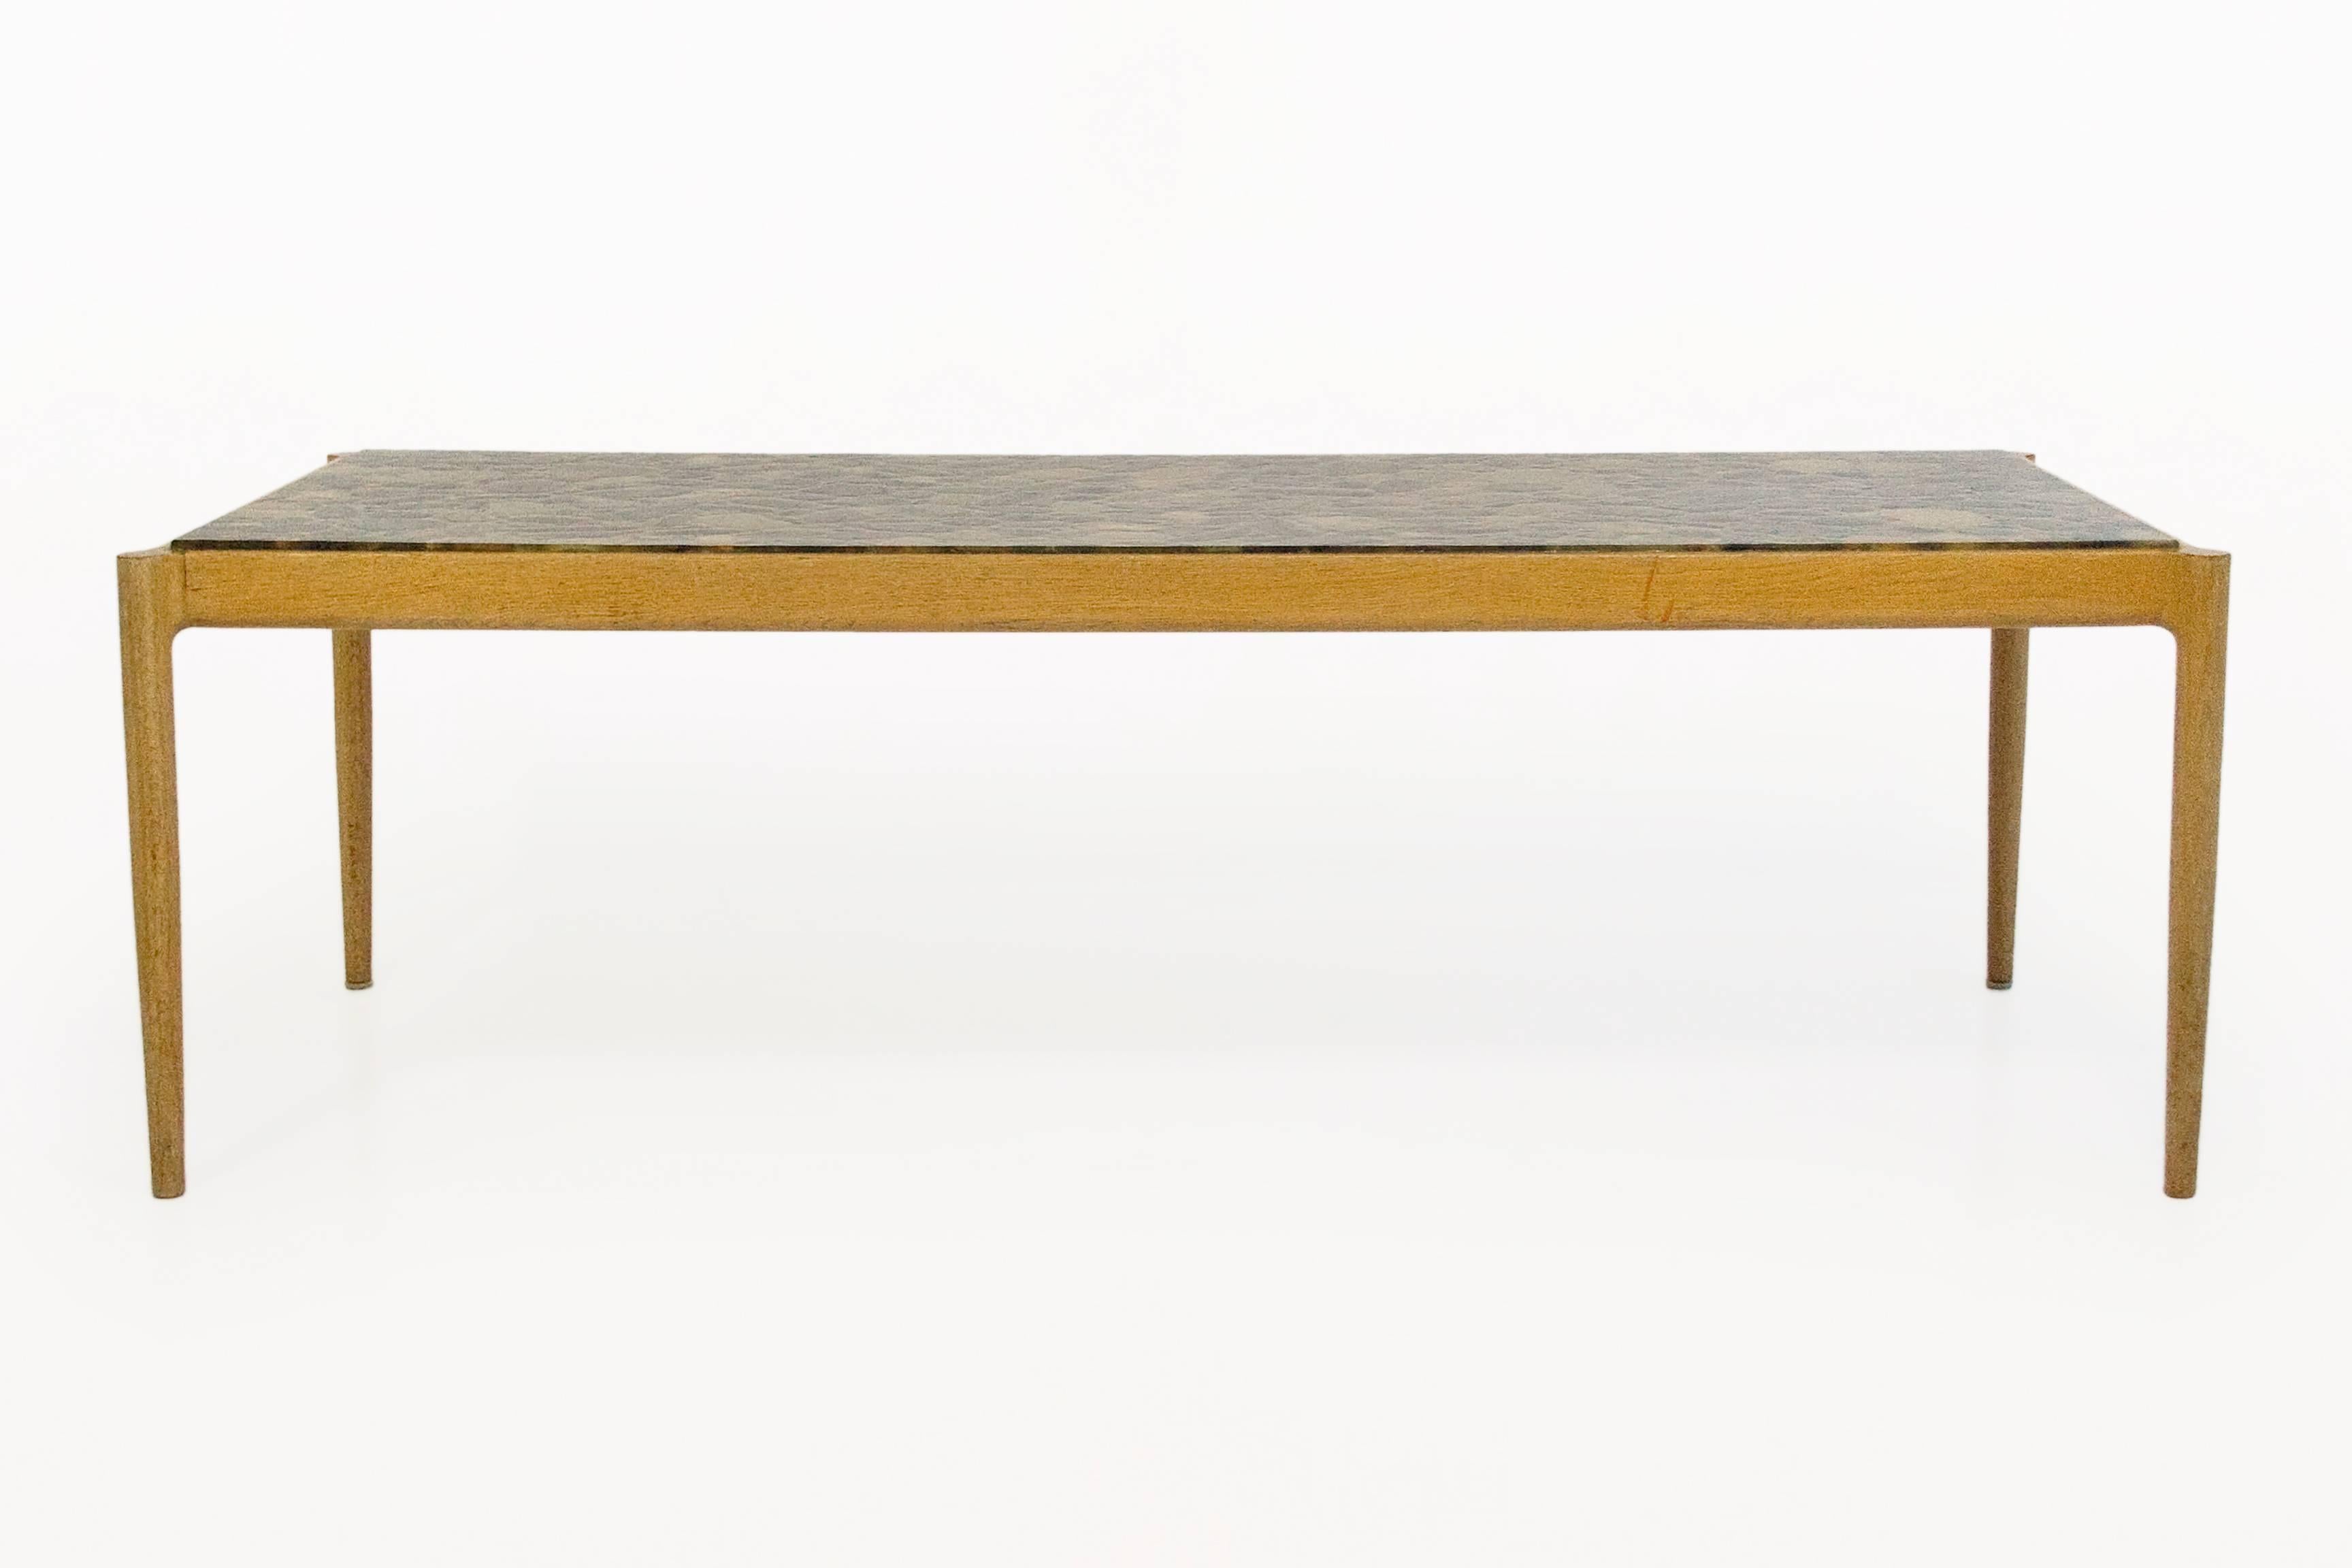 Ib Kofod-Larsen coffee table by Seffle Möbelfabrik
coffee table in elm with resin and stone top
circa 1960s, Sweden
with manufacturer's stamp
Very good vintage condition.